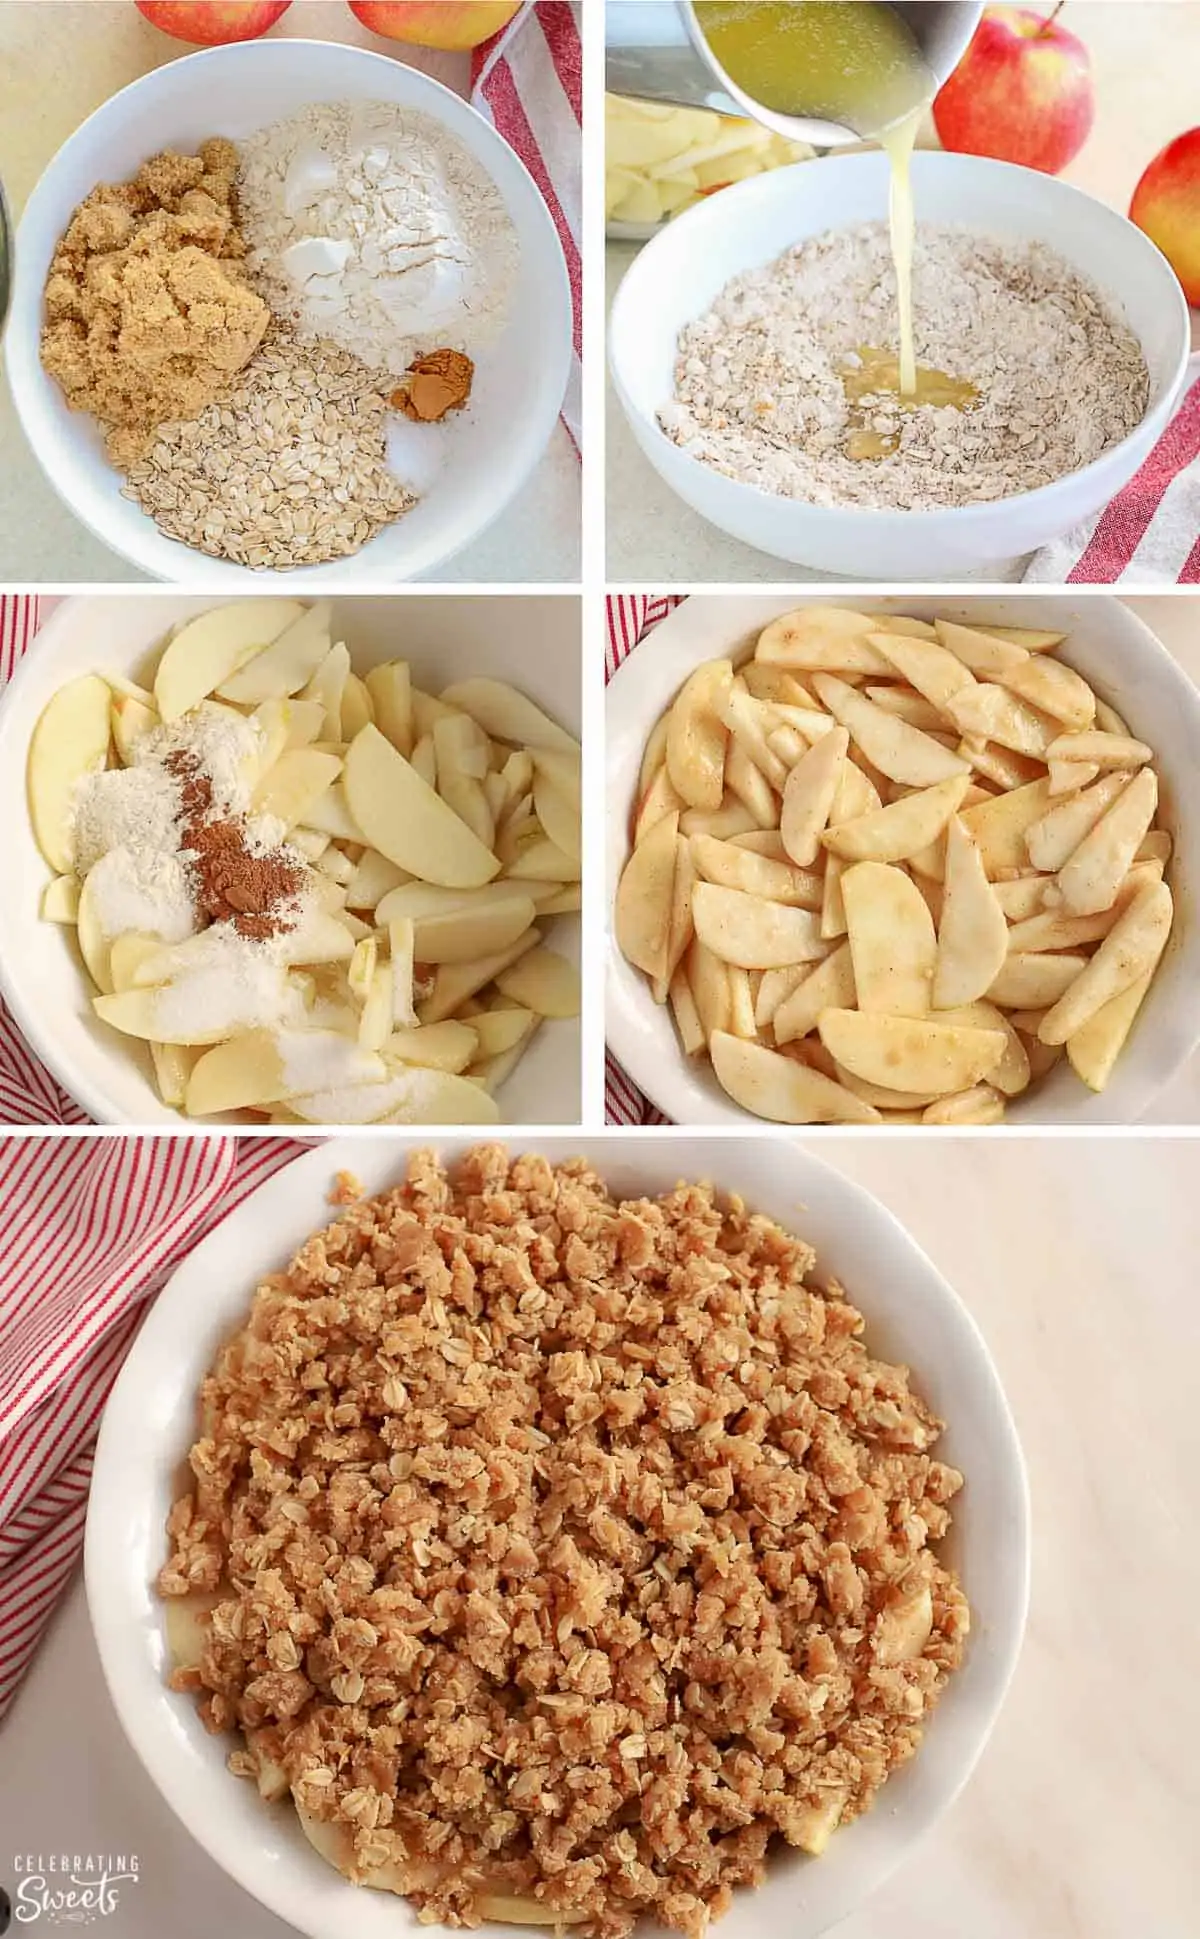 Step by step photos of how to make an apple pear crisp.